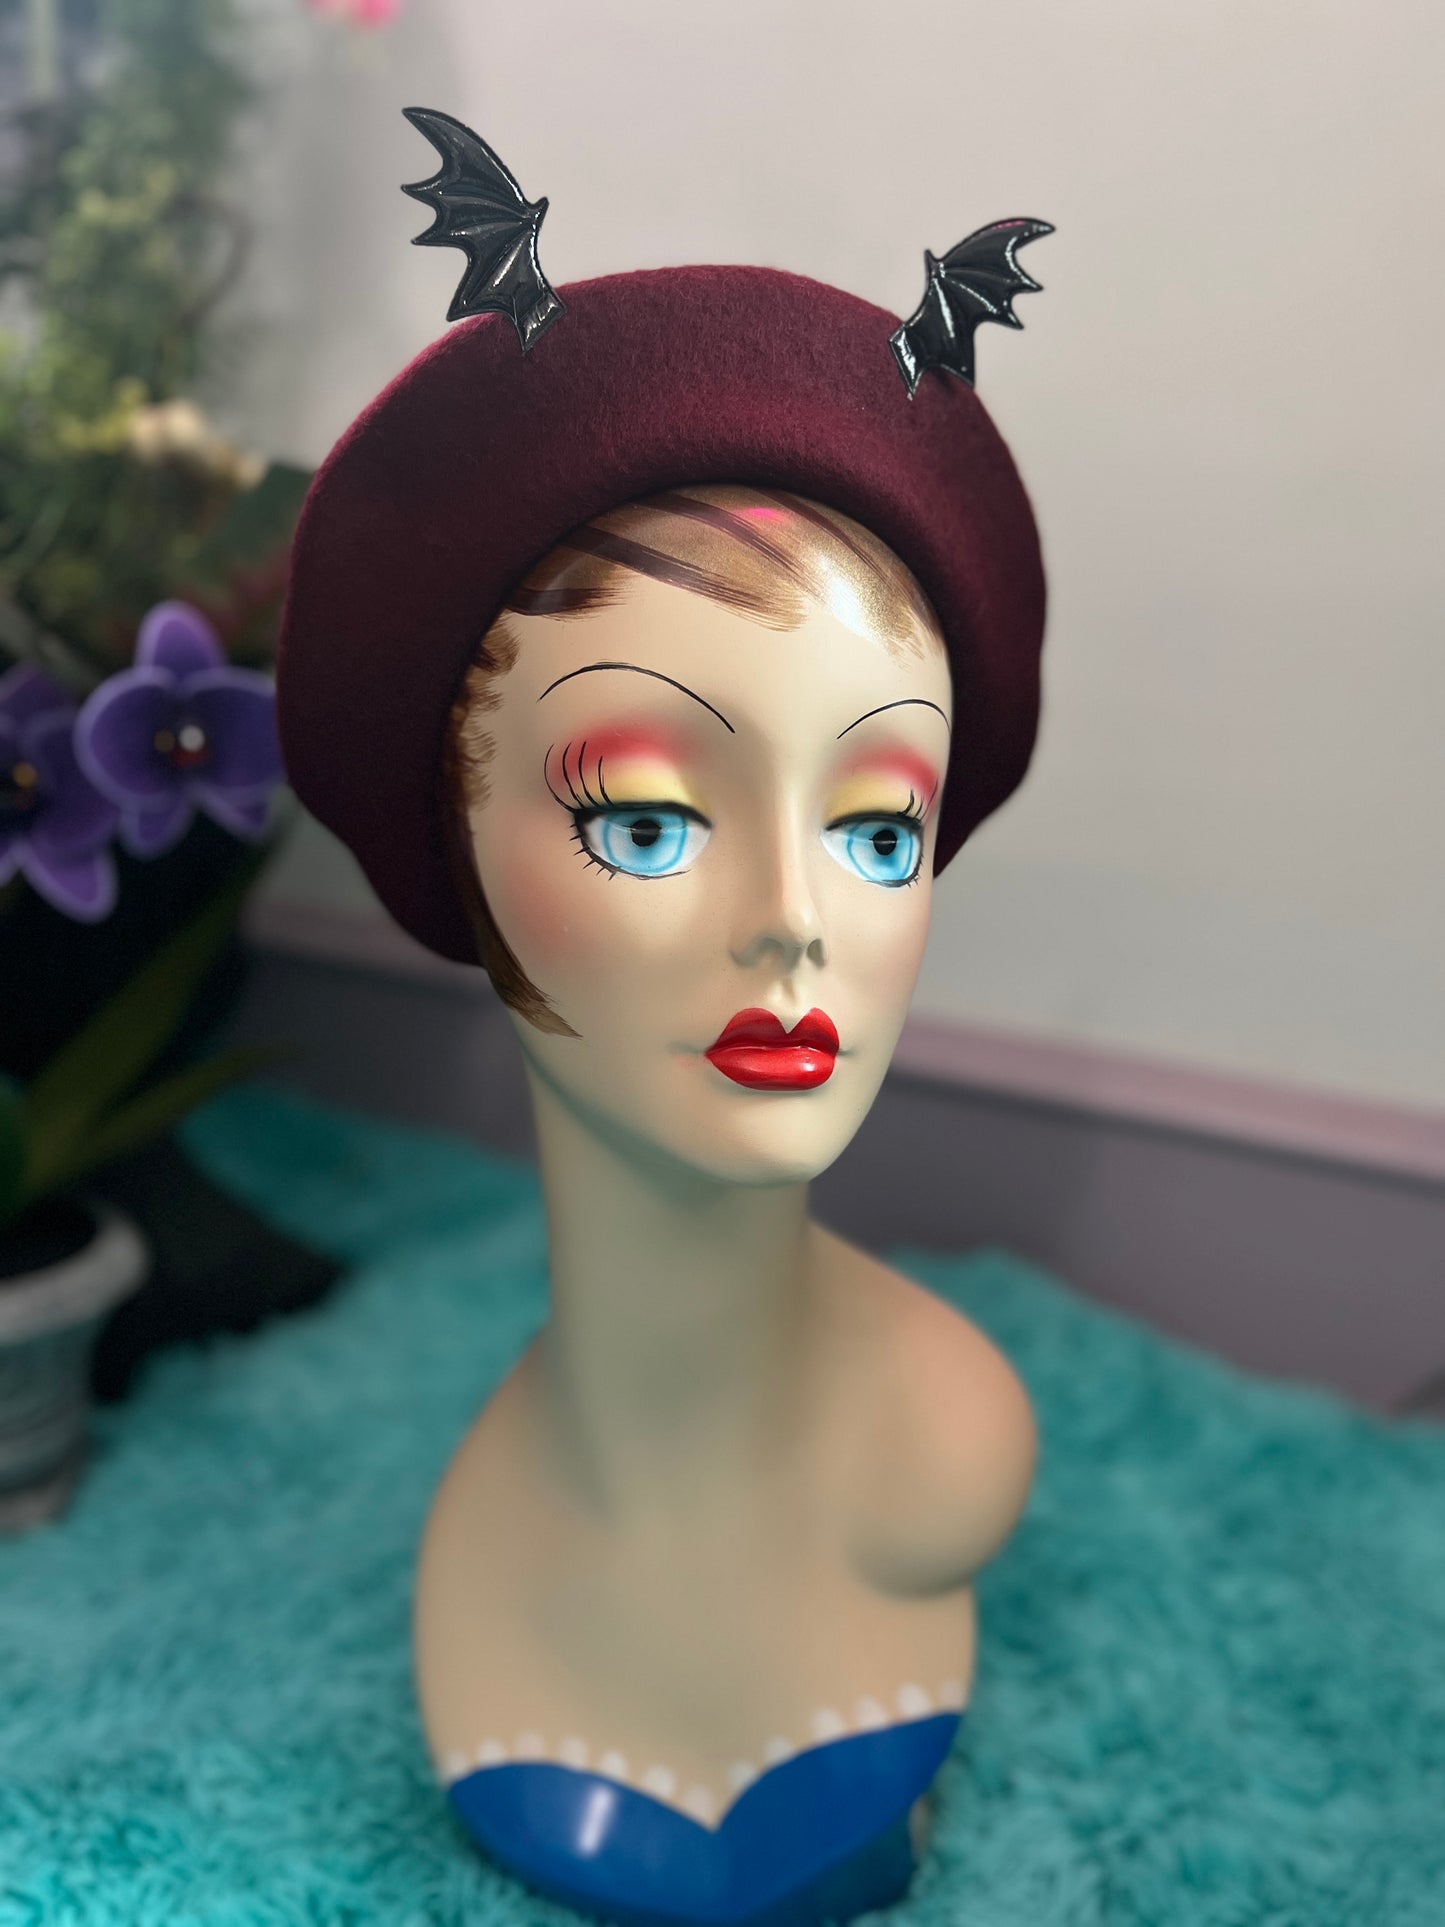 Burgundy Wool Felt Batty Beret from Blessed By Lilith